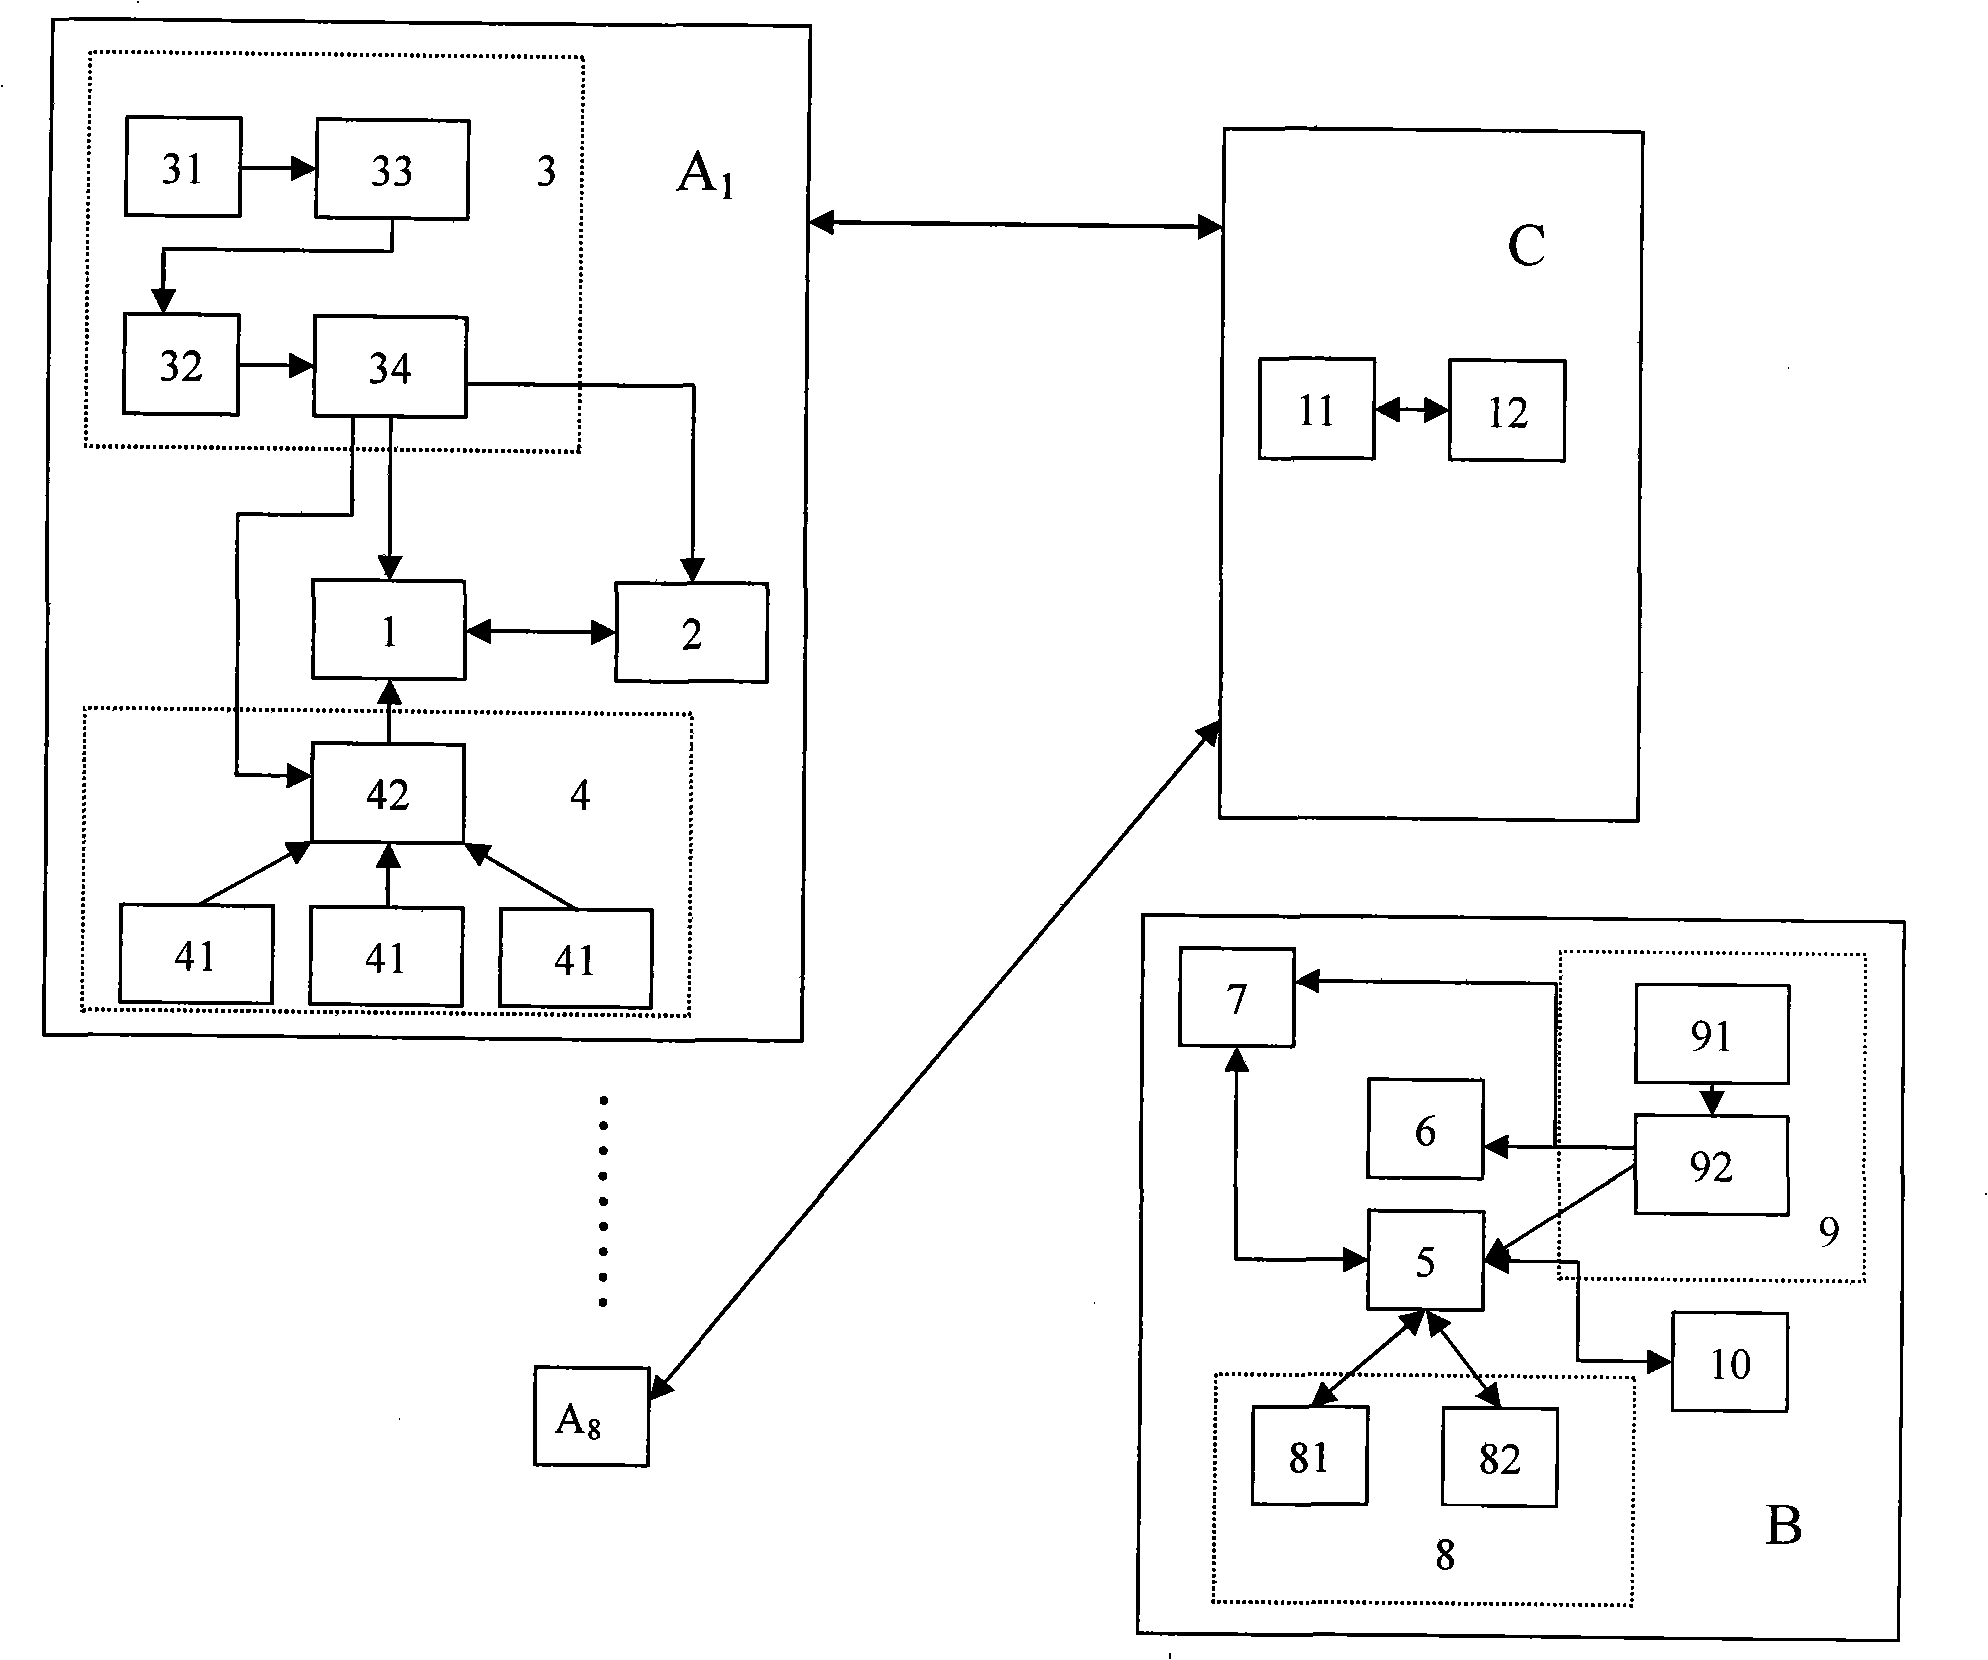 Power distribution network distribution circuit fault location system